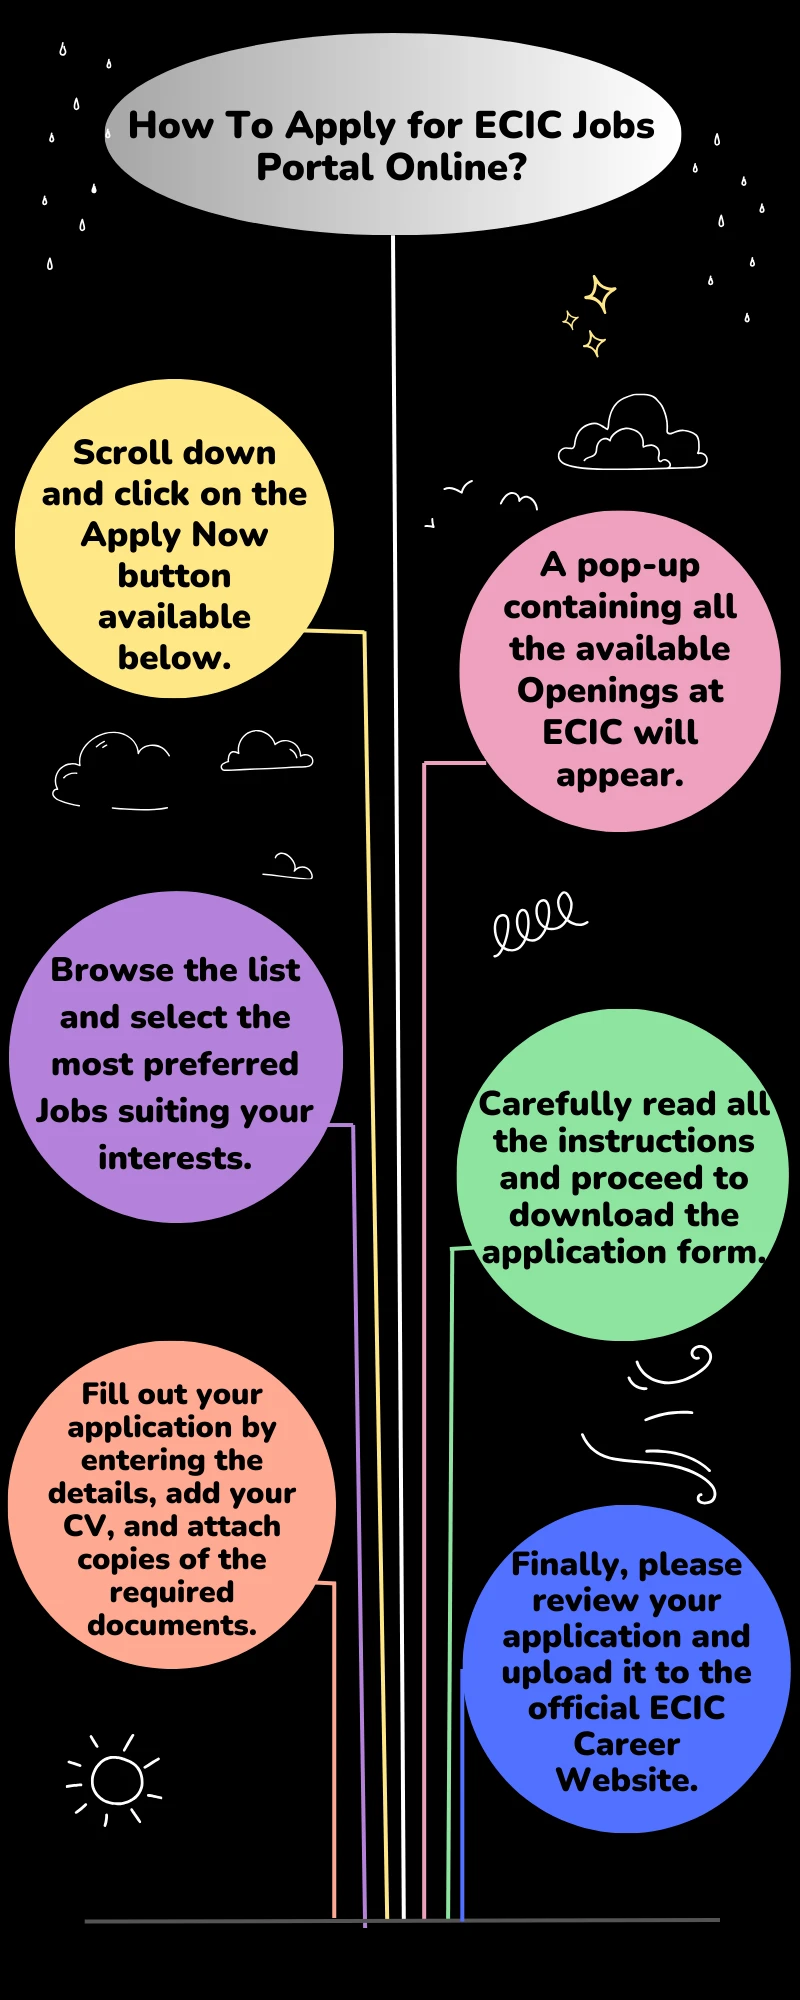 How To Apply for ECIC Jobs Portal Online?